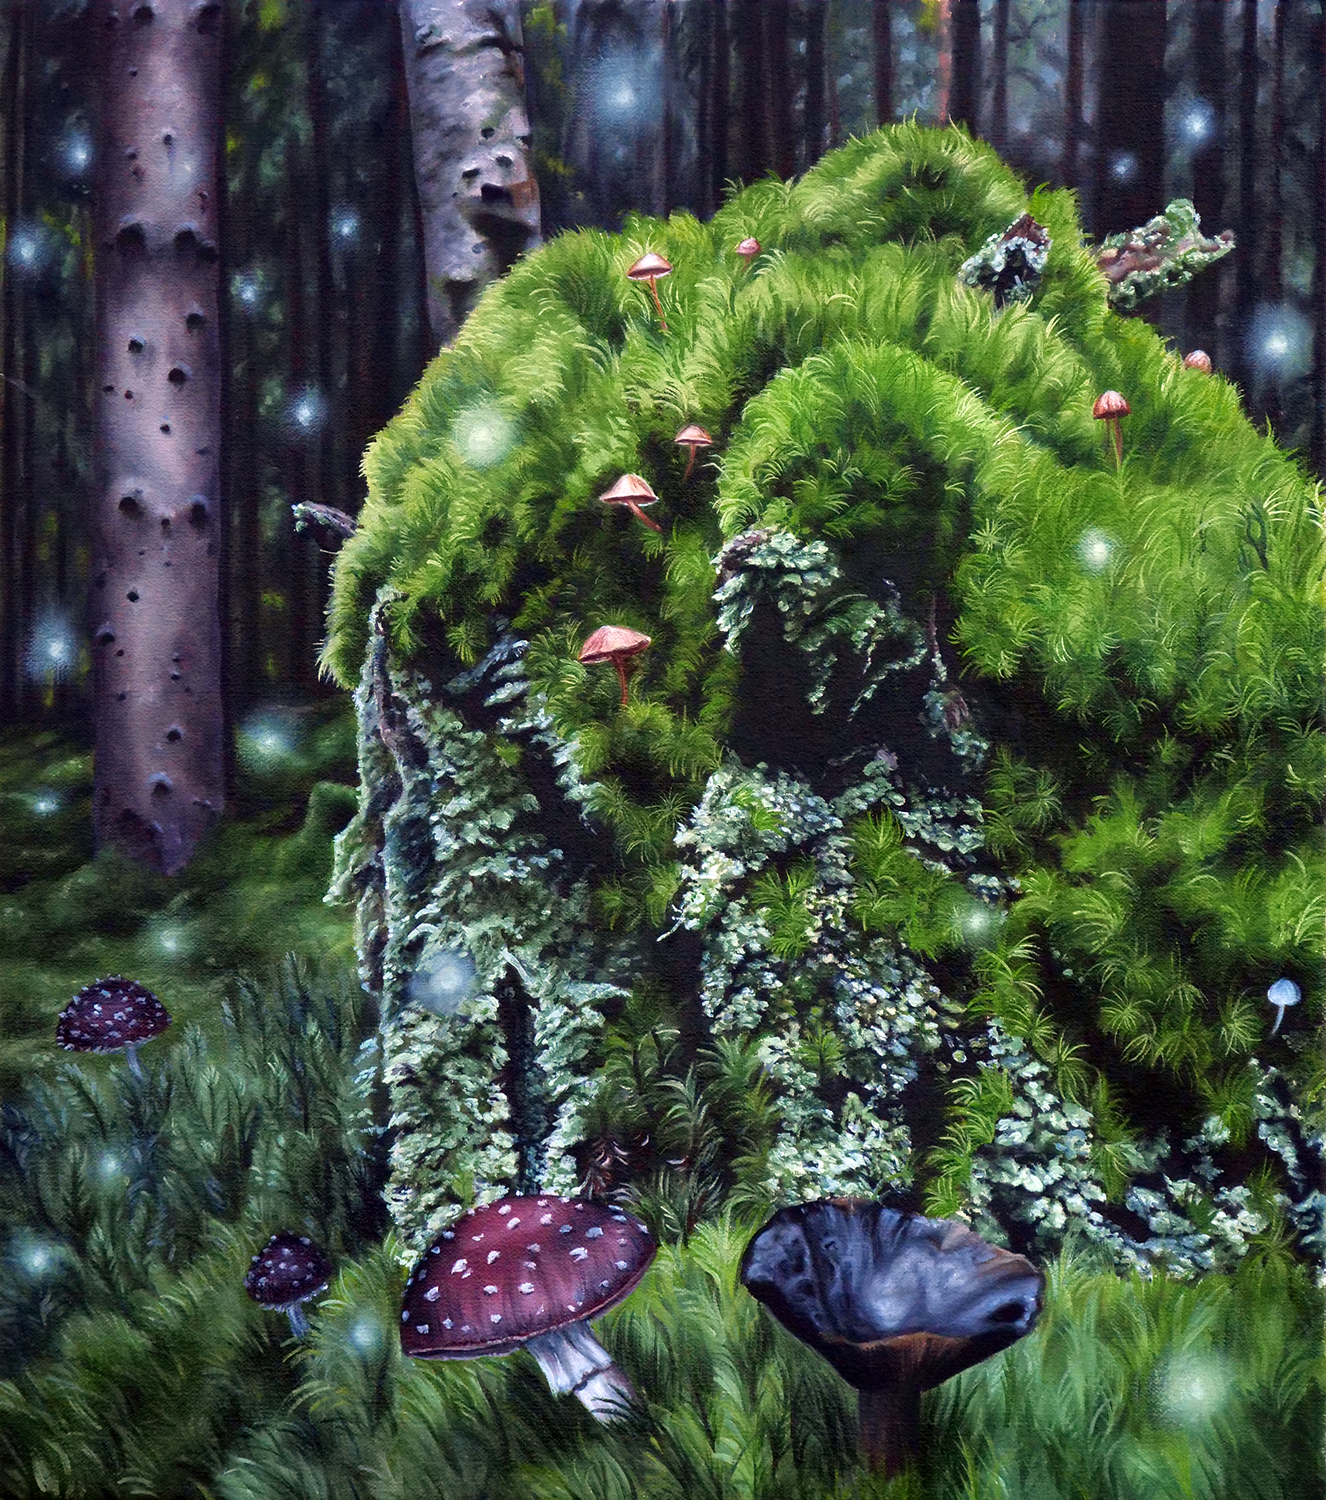 Hidden Realms by Christina Rigdeway full oil painting